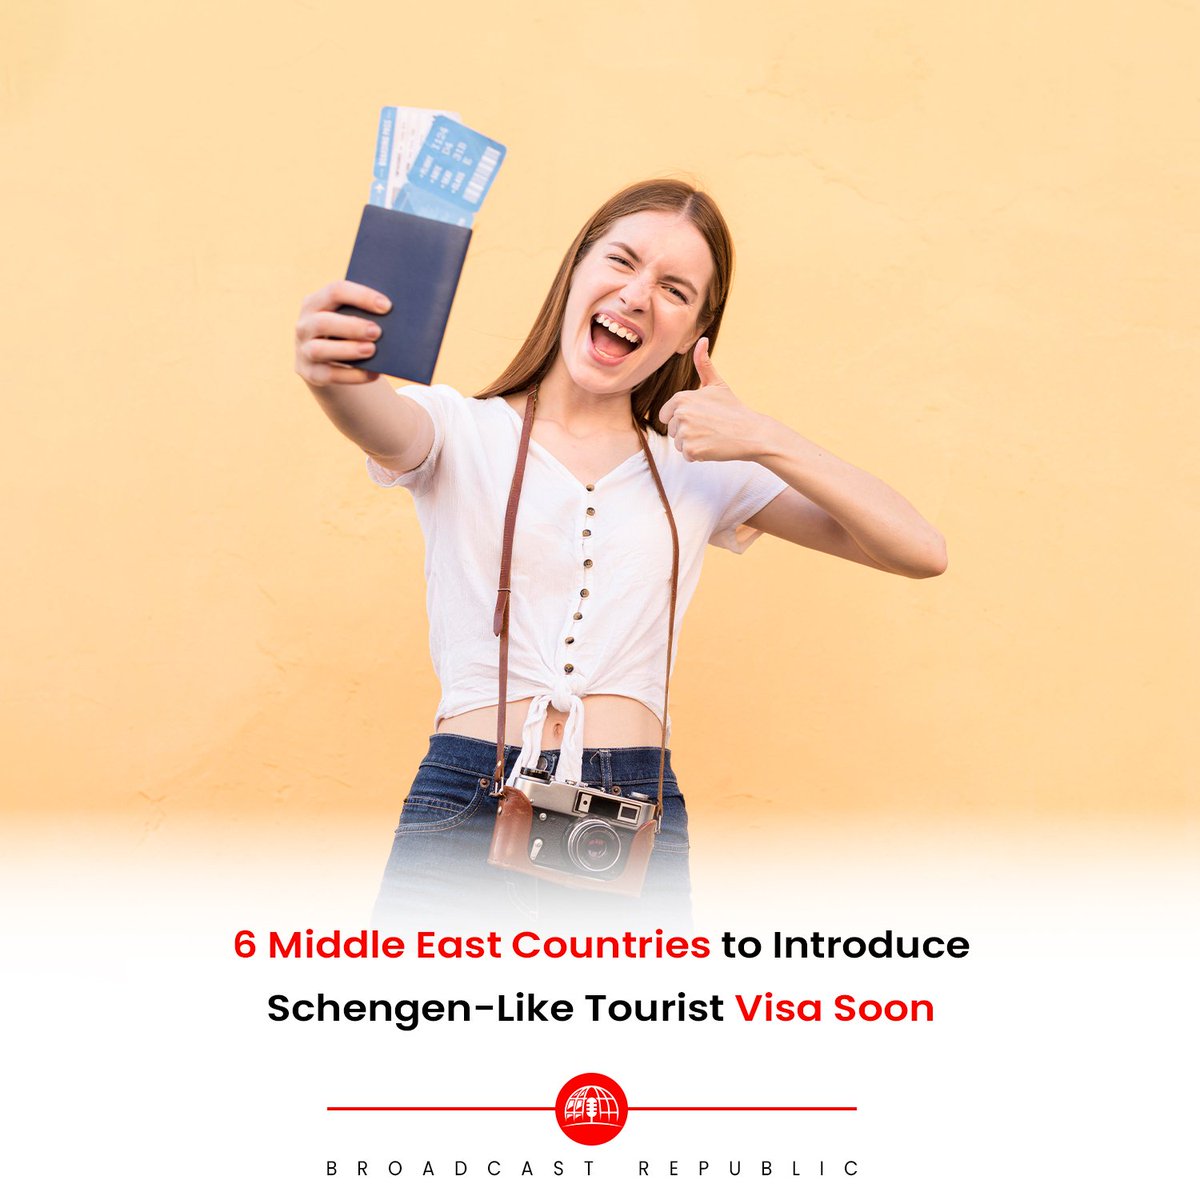 United Arab Emirates (UAE) Minister of Economy, Abdullah bin Touq Al Marri, has unveiled plans for Gulf Cooperation Council (GCC) countries to introduce a shared tourist visa similar to the Schengen visa, allowing travelers to visit all bloc nations. 

#MiddleEastTourism